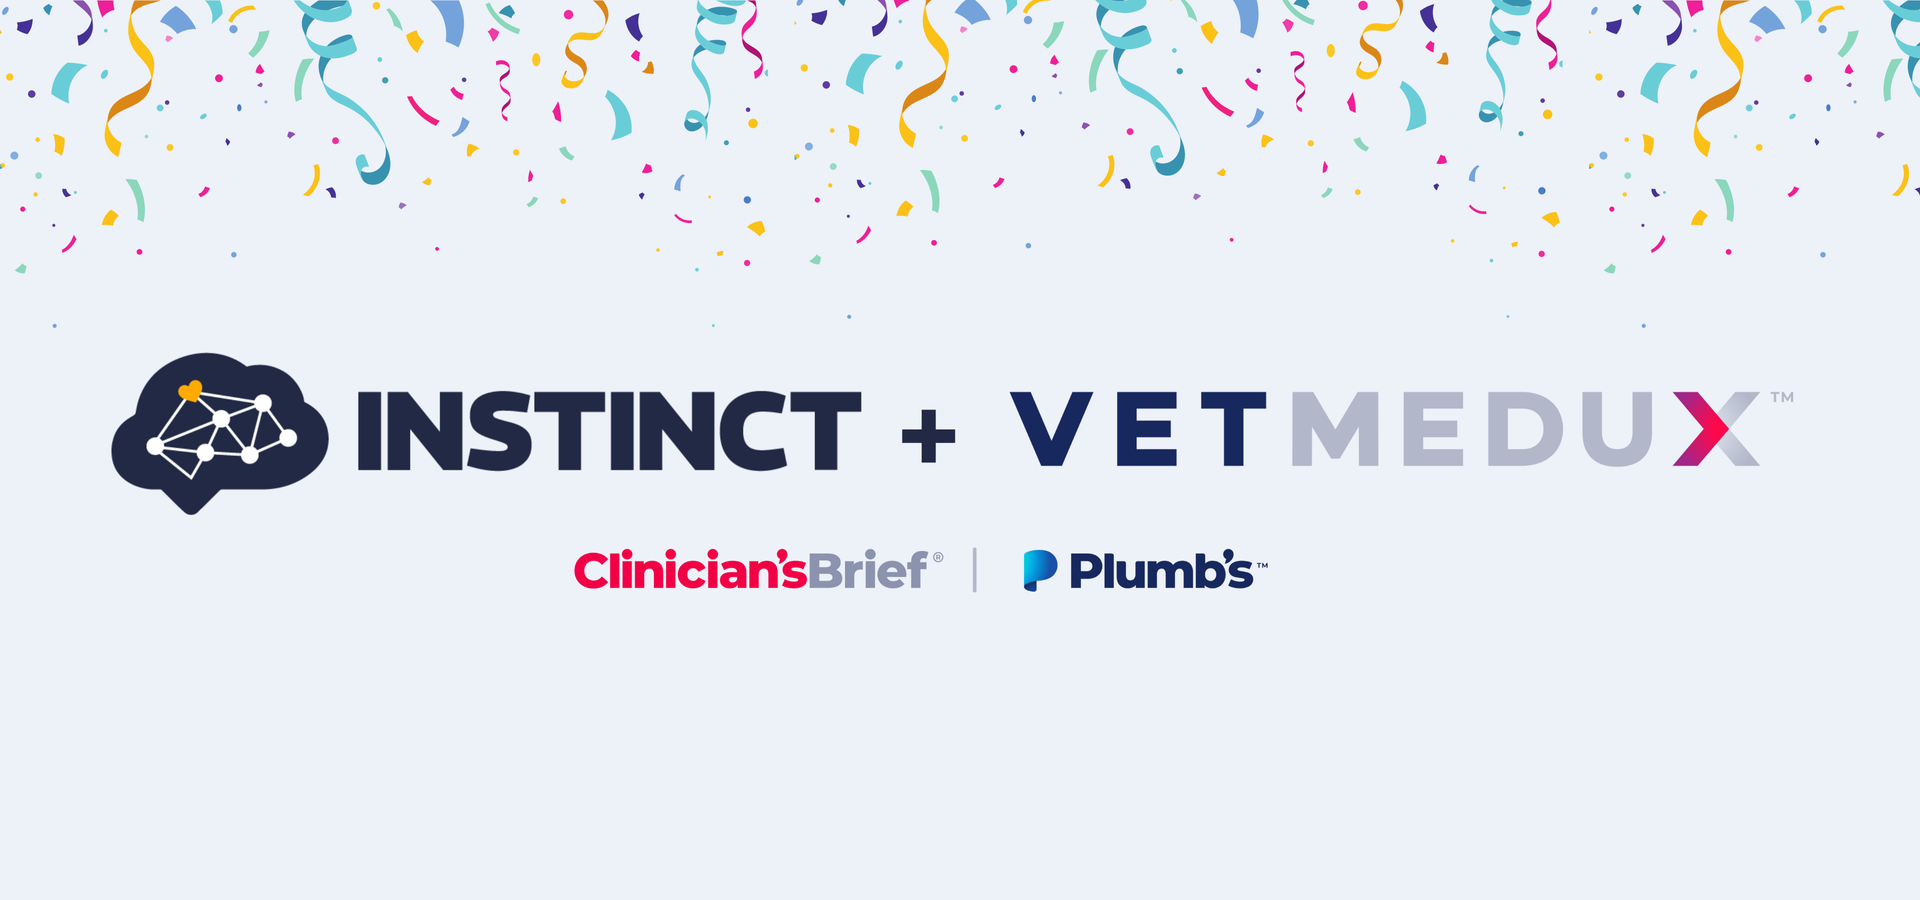 Get Excited: Instinct and VetMedux are Joining Forces!